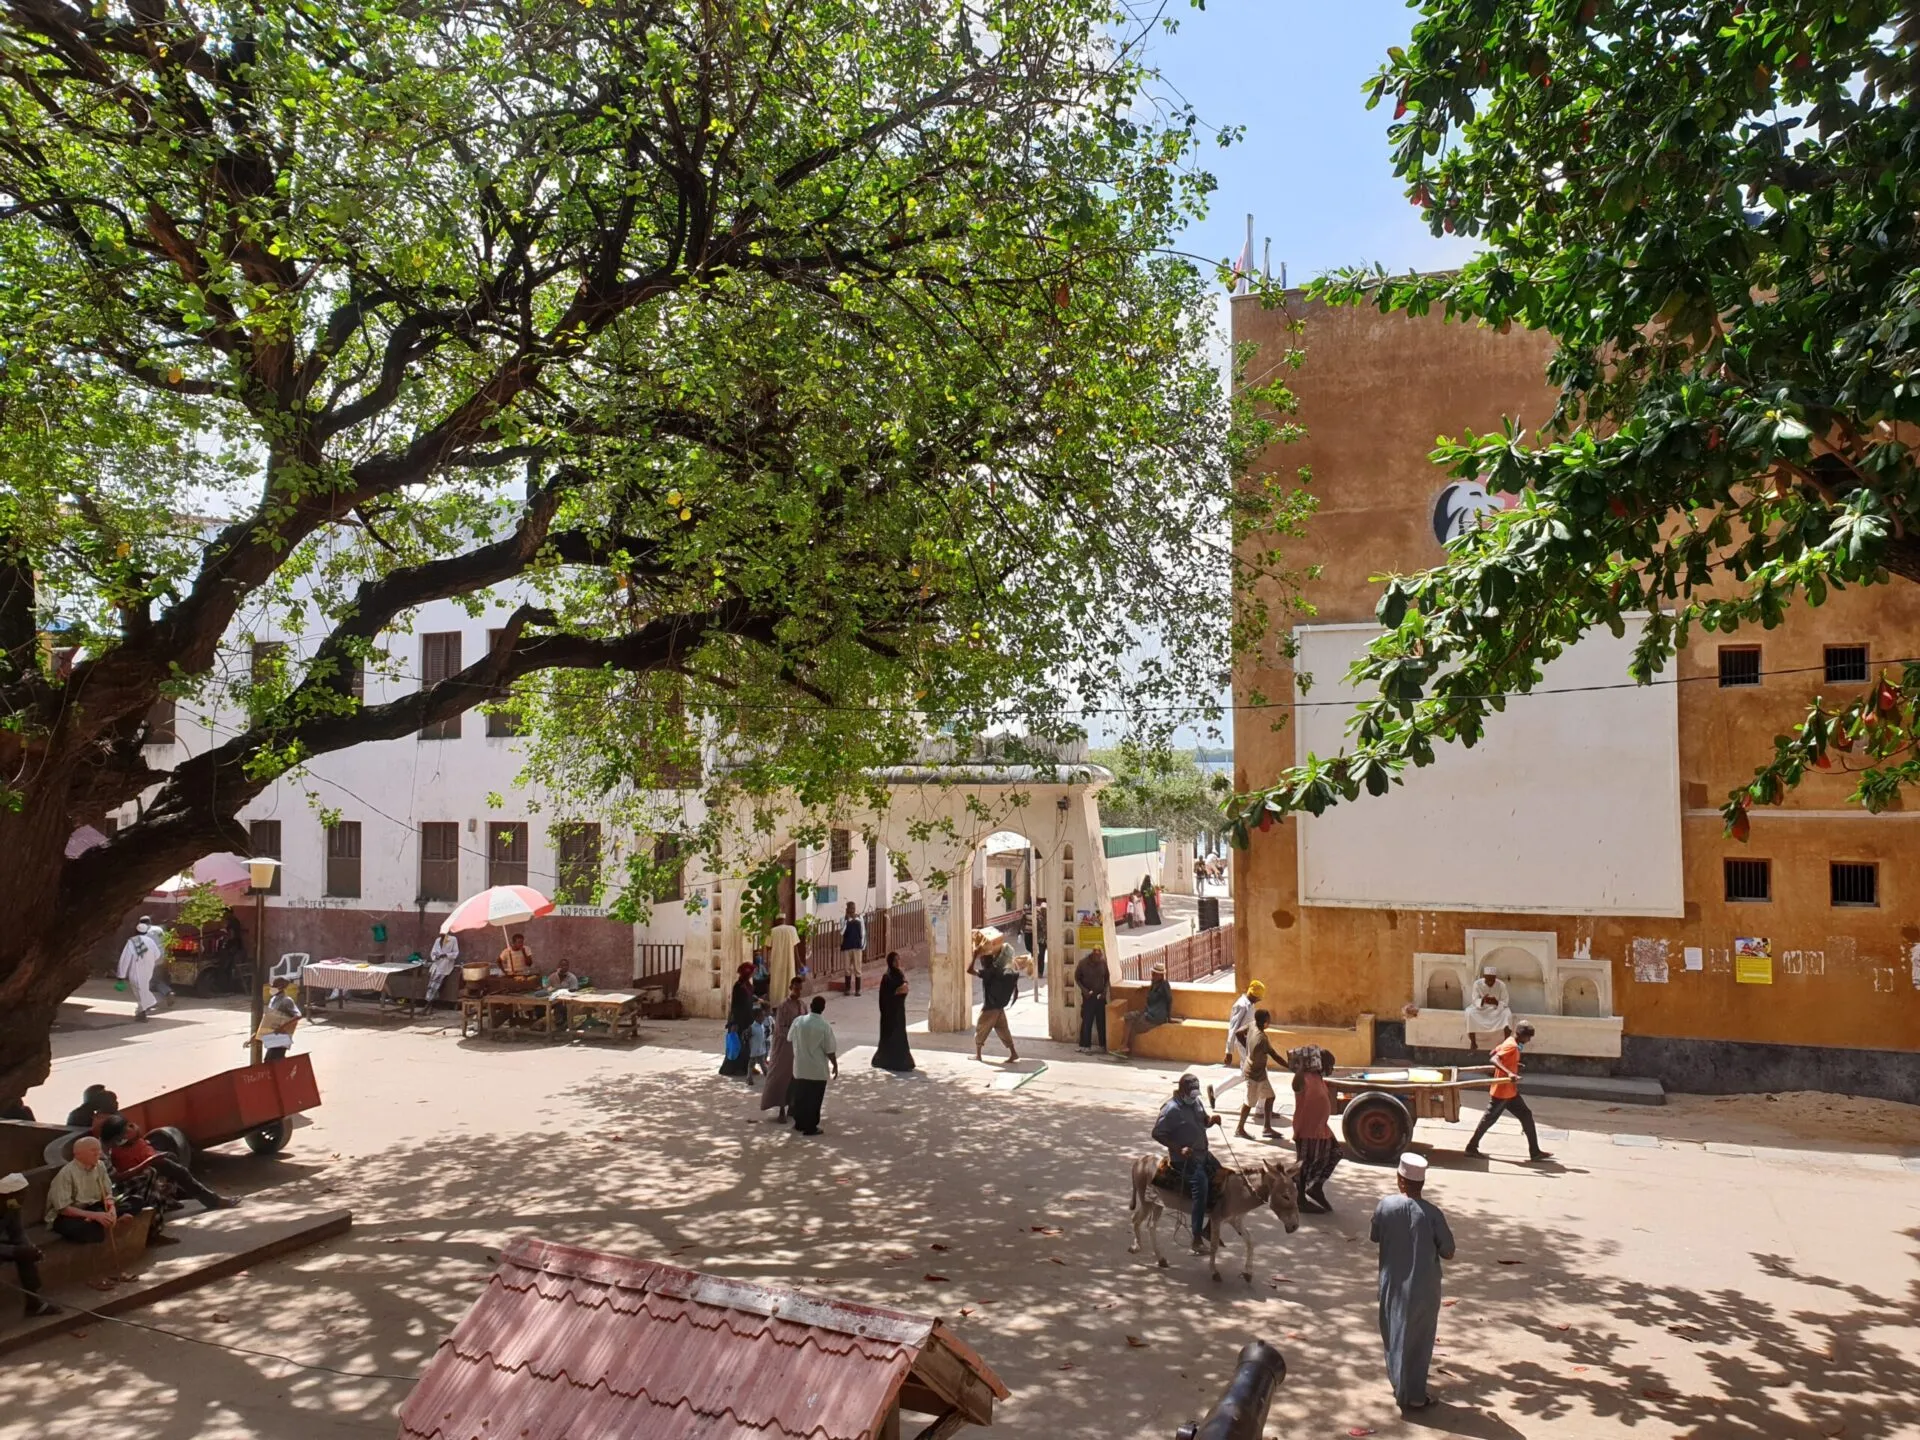 Town Square in Kenya, Africa | Architecture - Rated 0.8